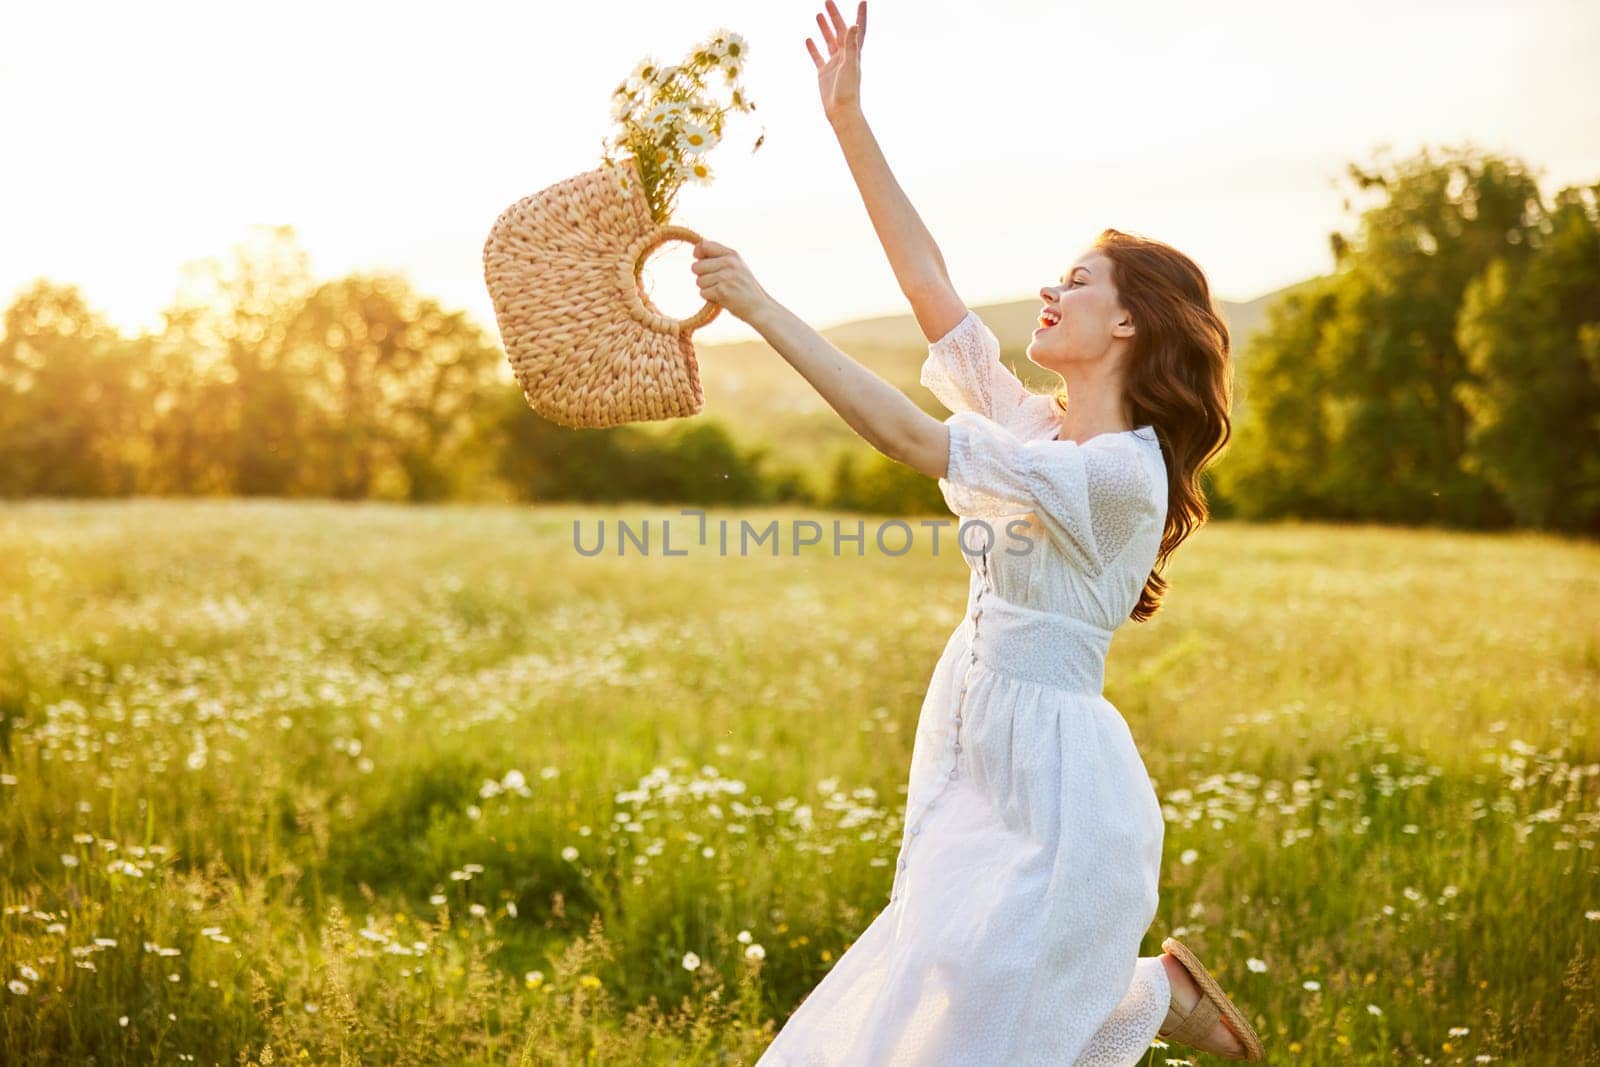 happy woman in a long light dress fool in the field with a wicker basket in her hands. High quality photo